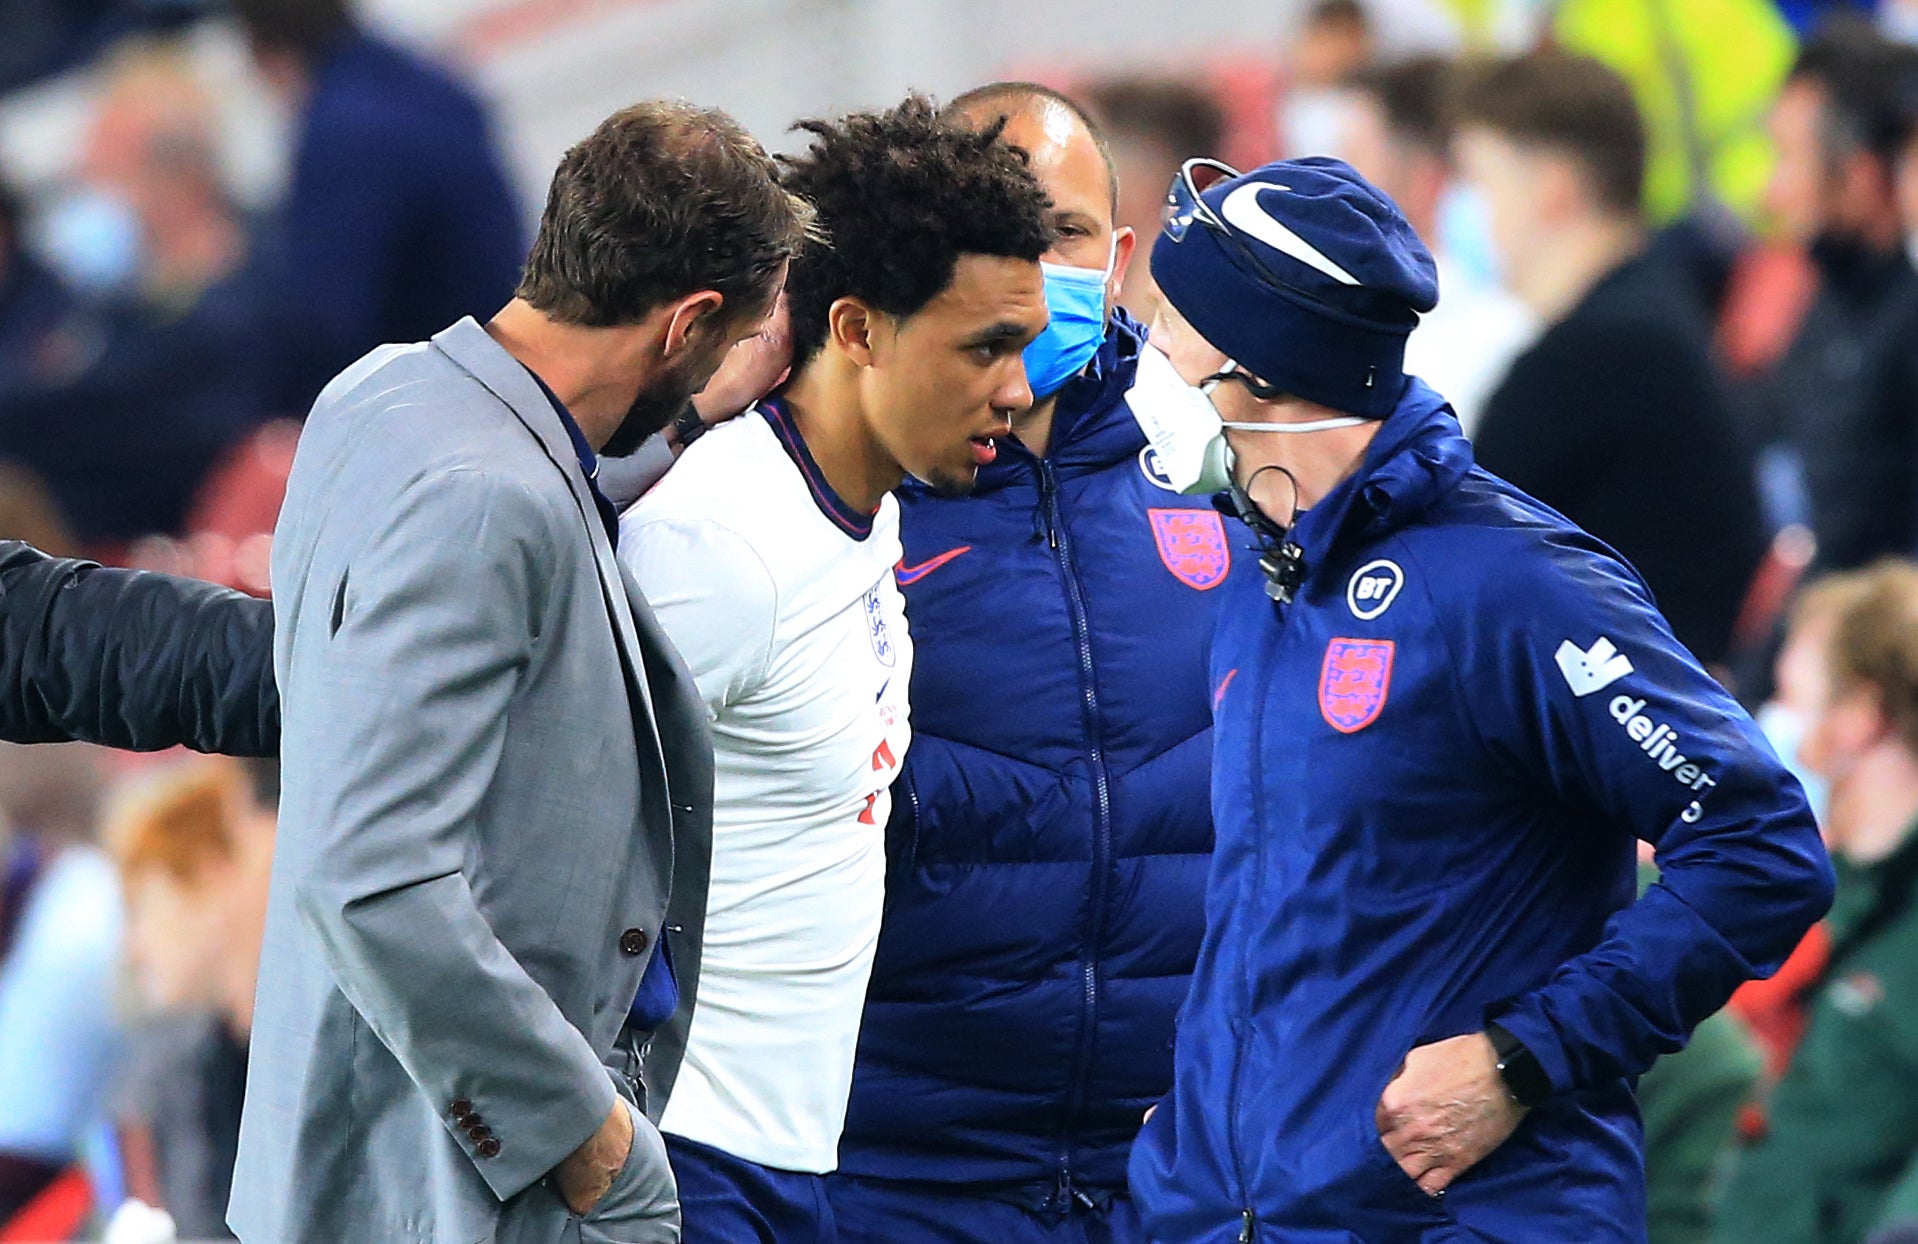 The FA has confirmed Trent Alexander-Arnold will miss Euro 2020